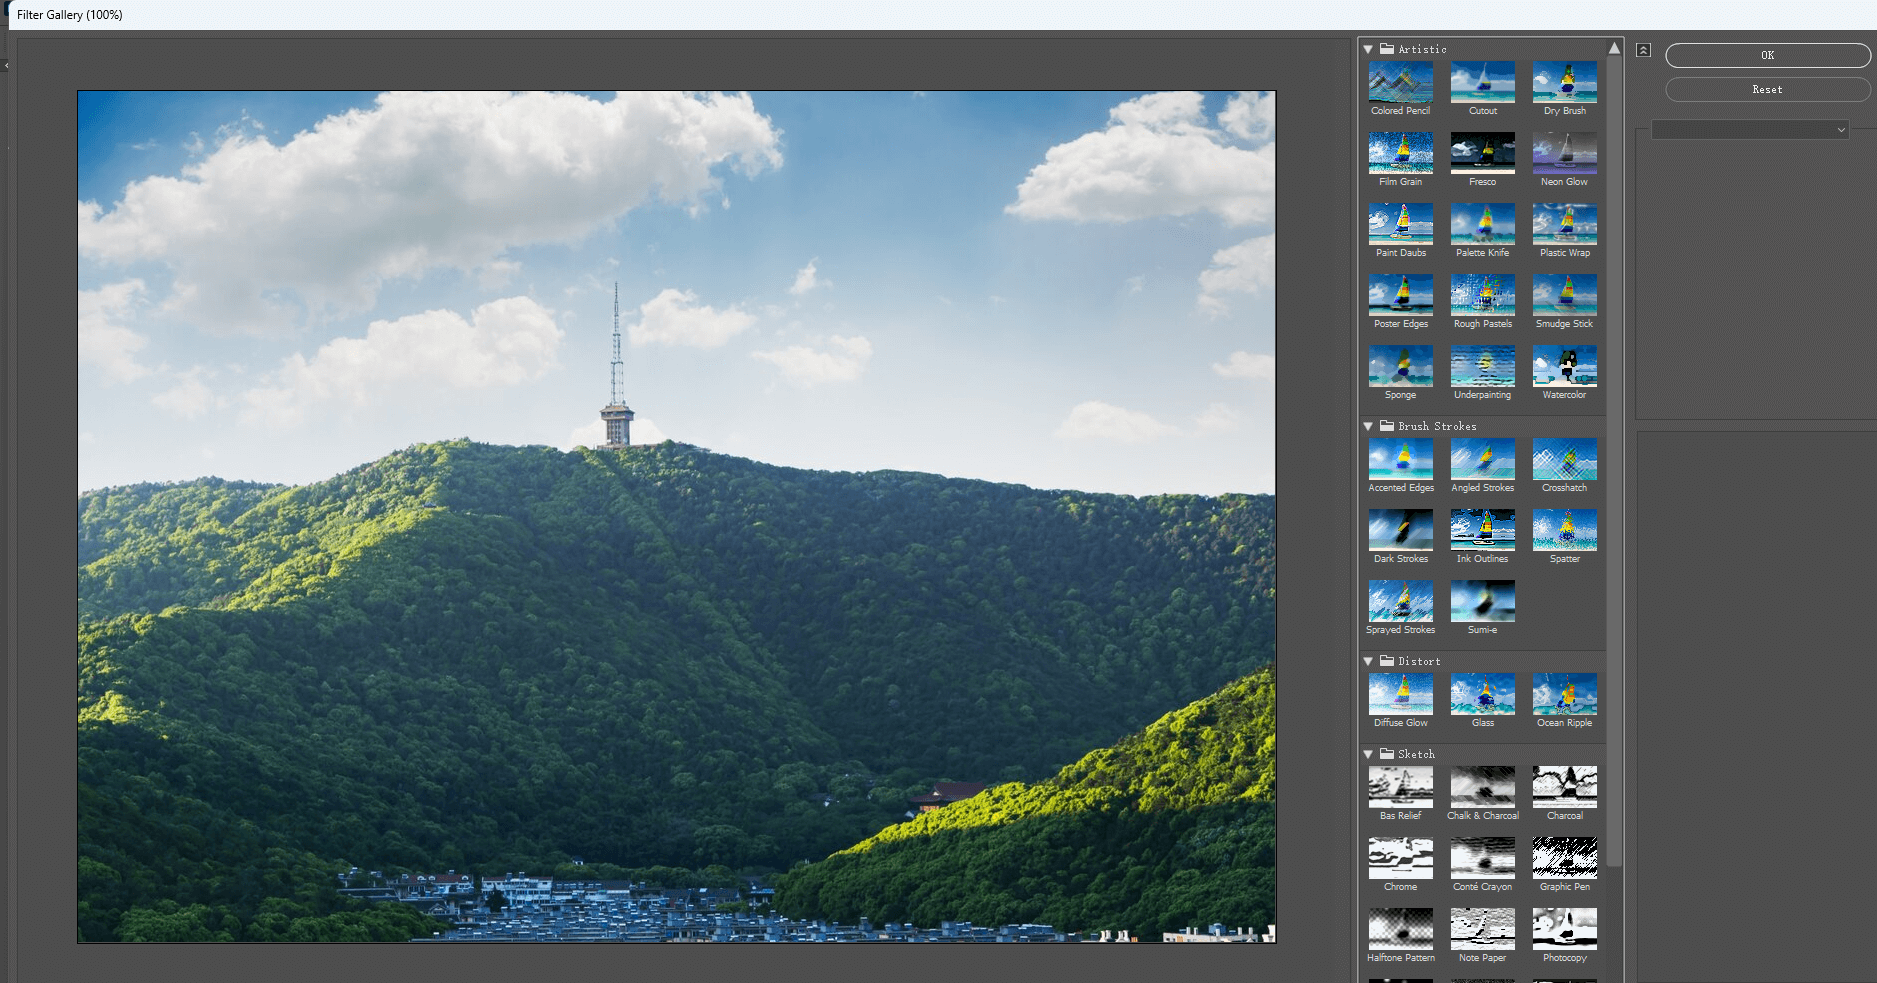 Edit a photo in Photoshop by adding a filter